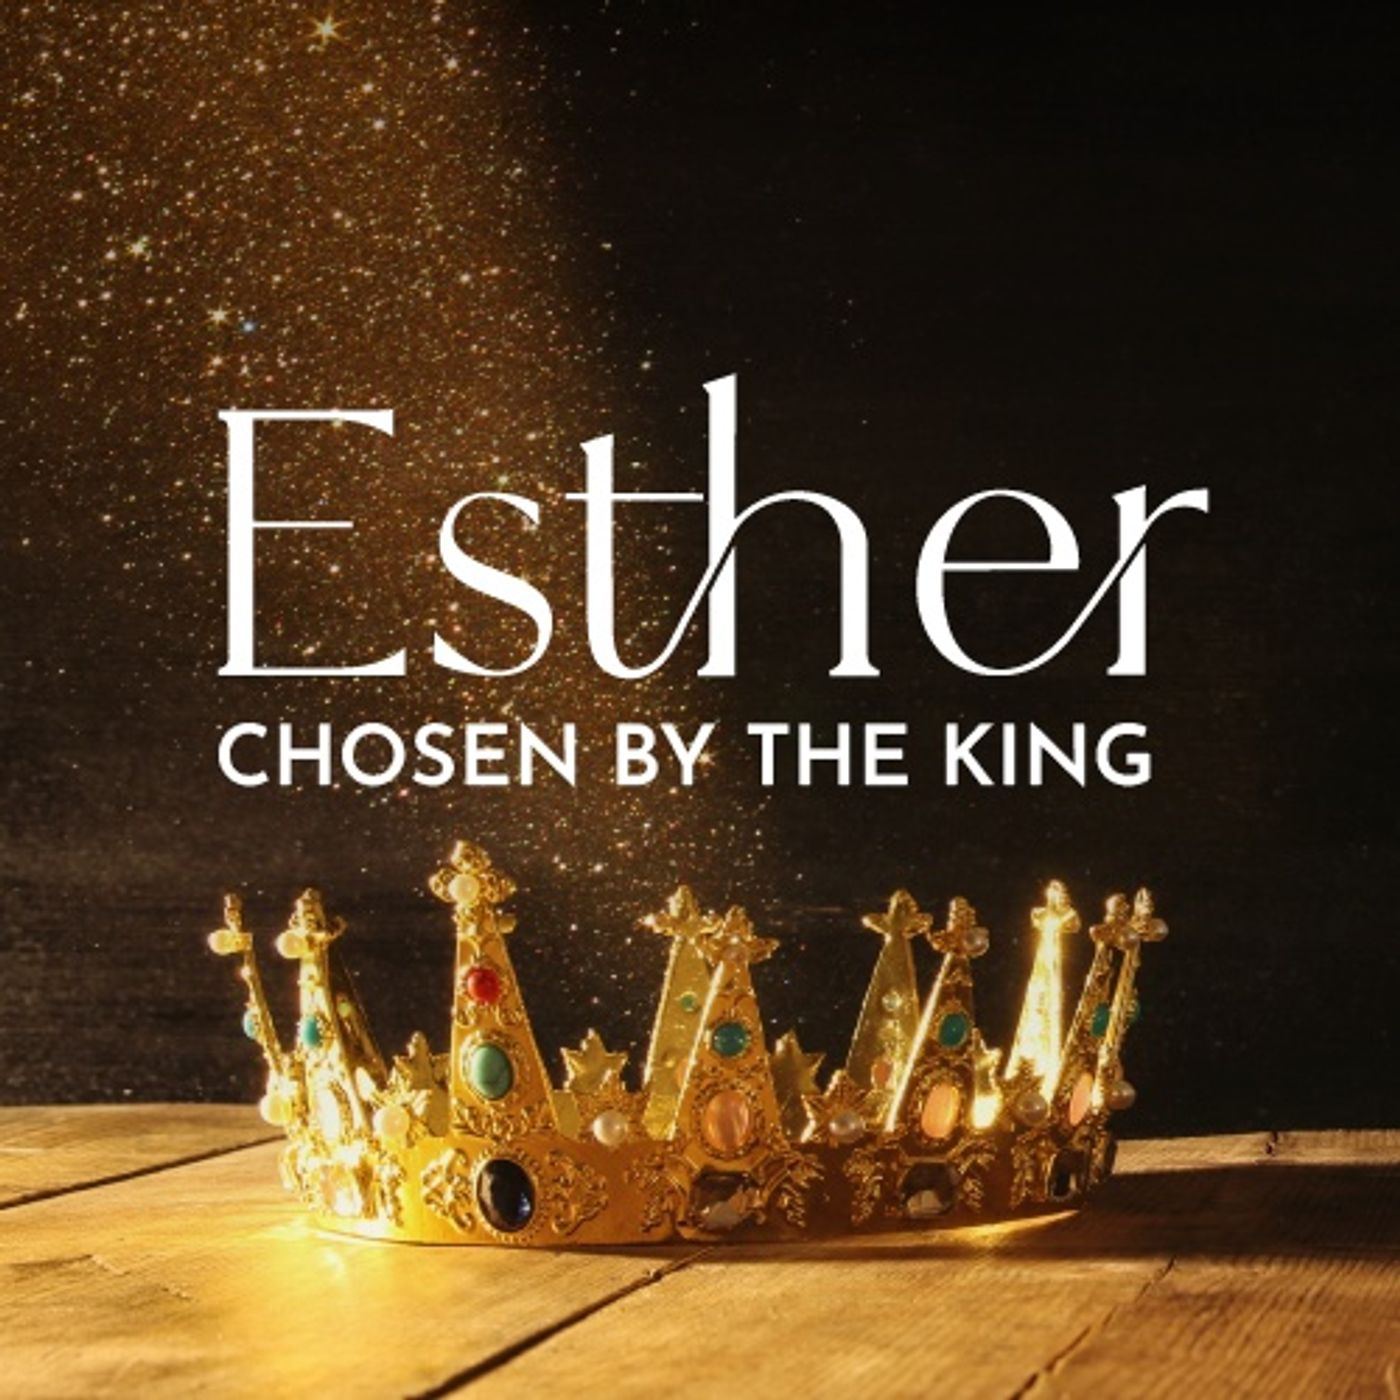 Esther: Chosen by the King